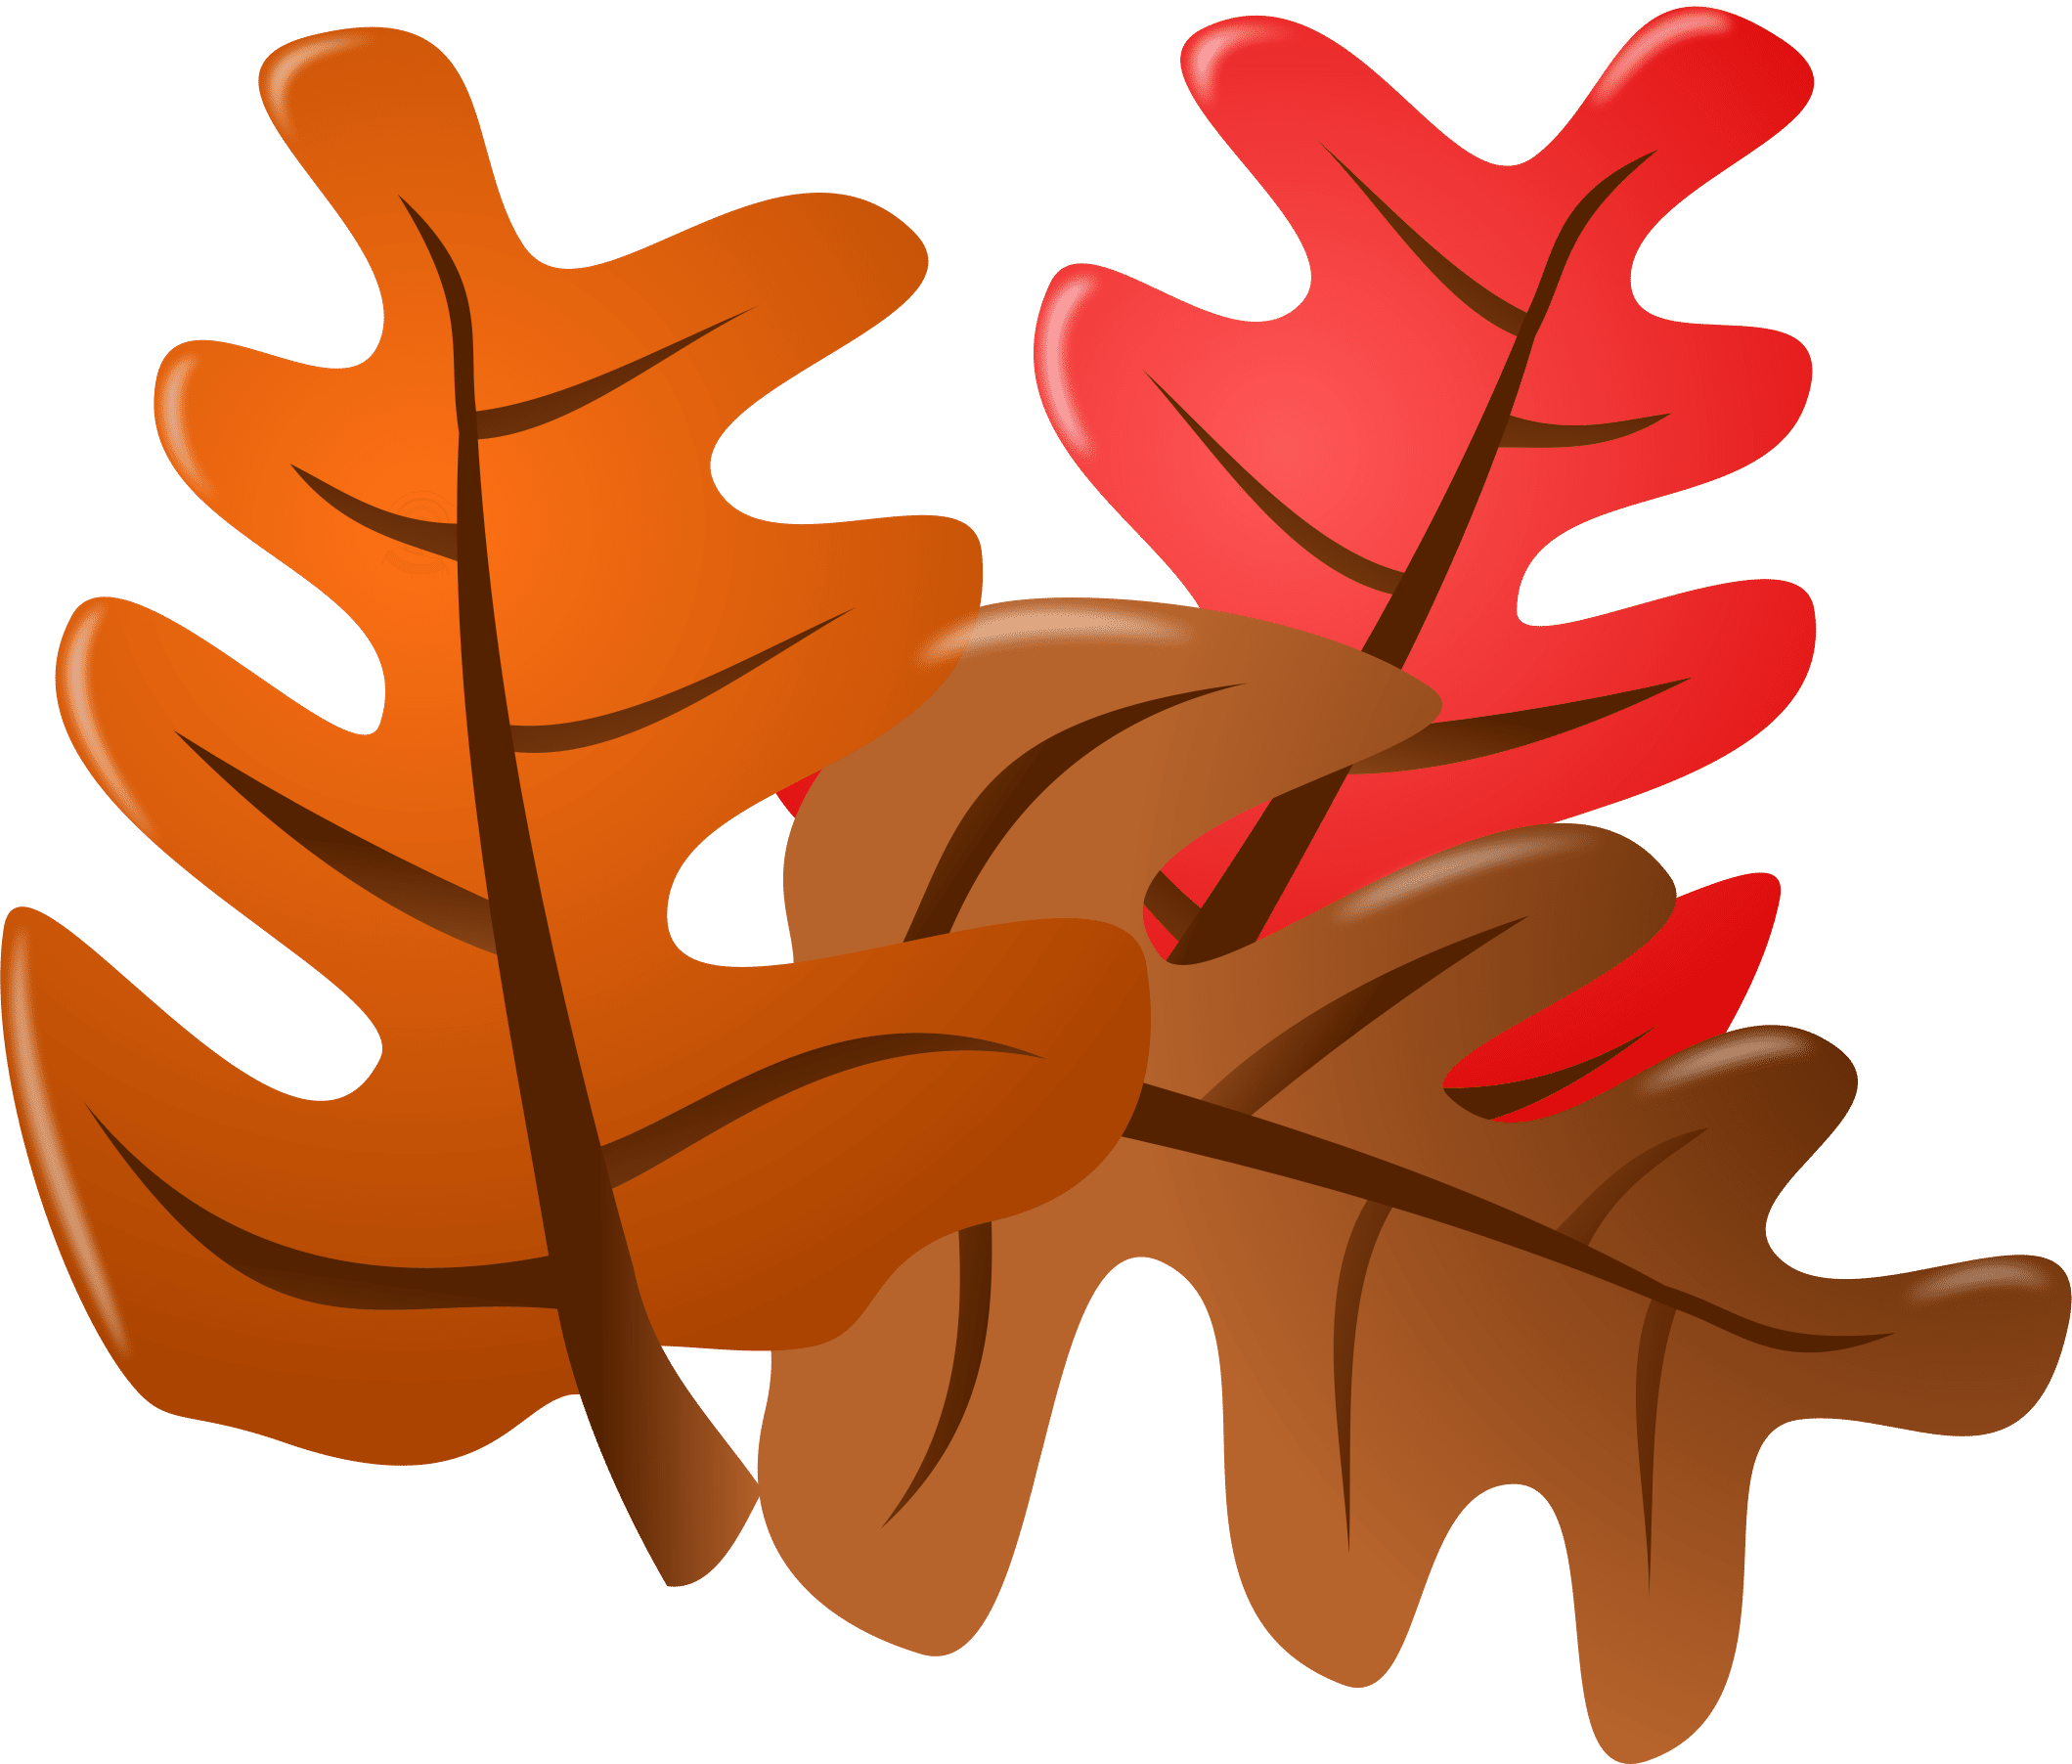 Download These Colorful Free Clip Art Images of Fall Leaves